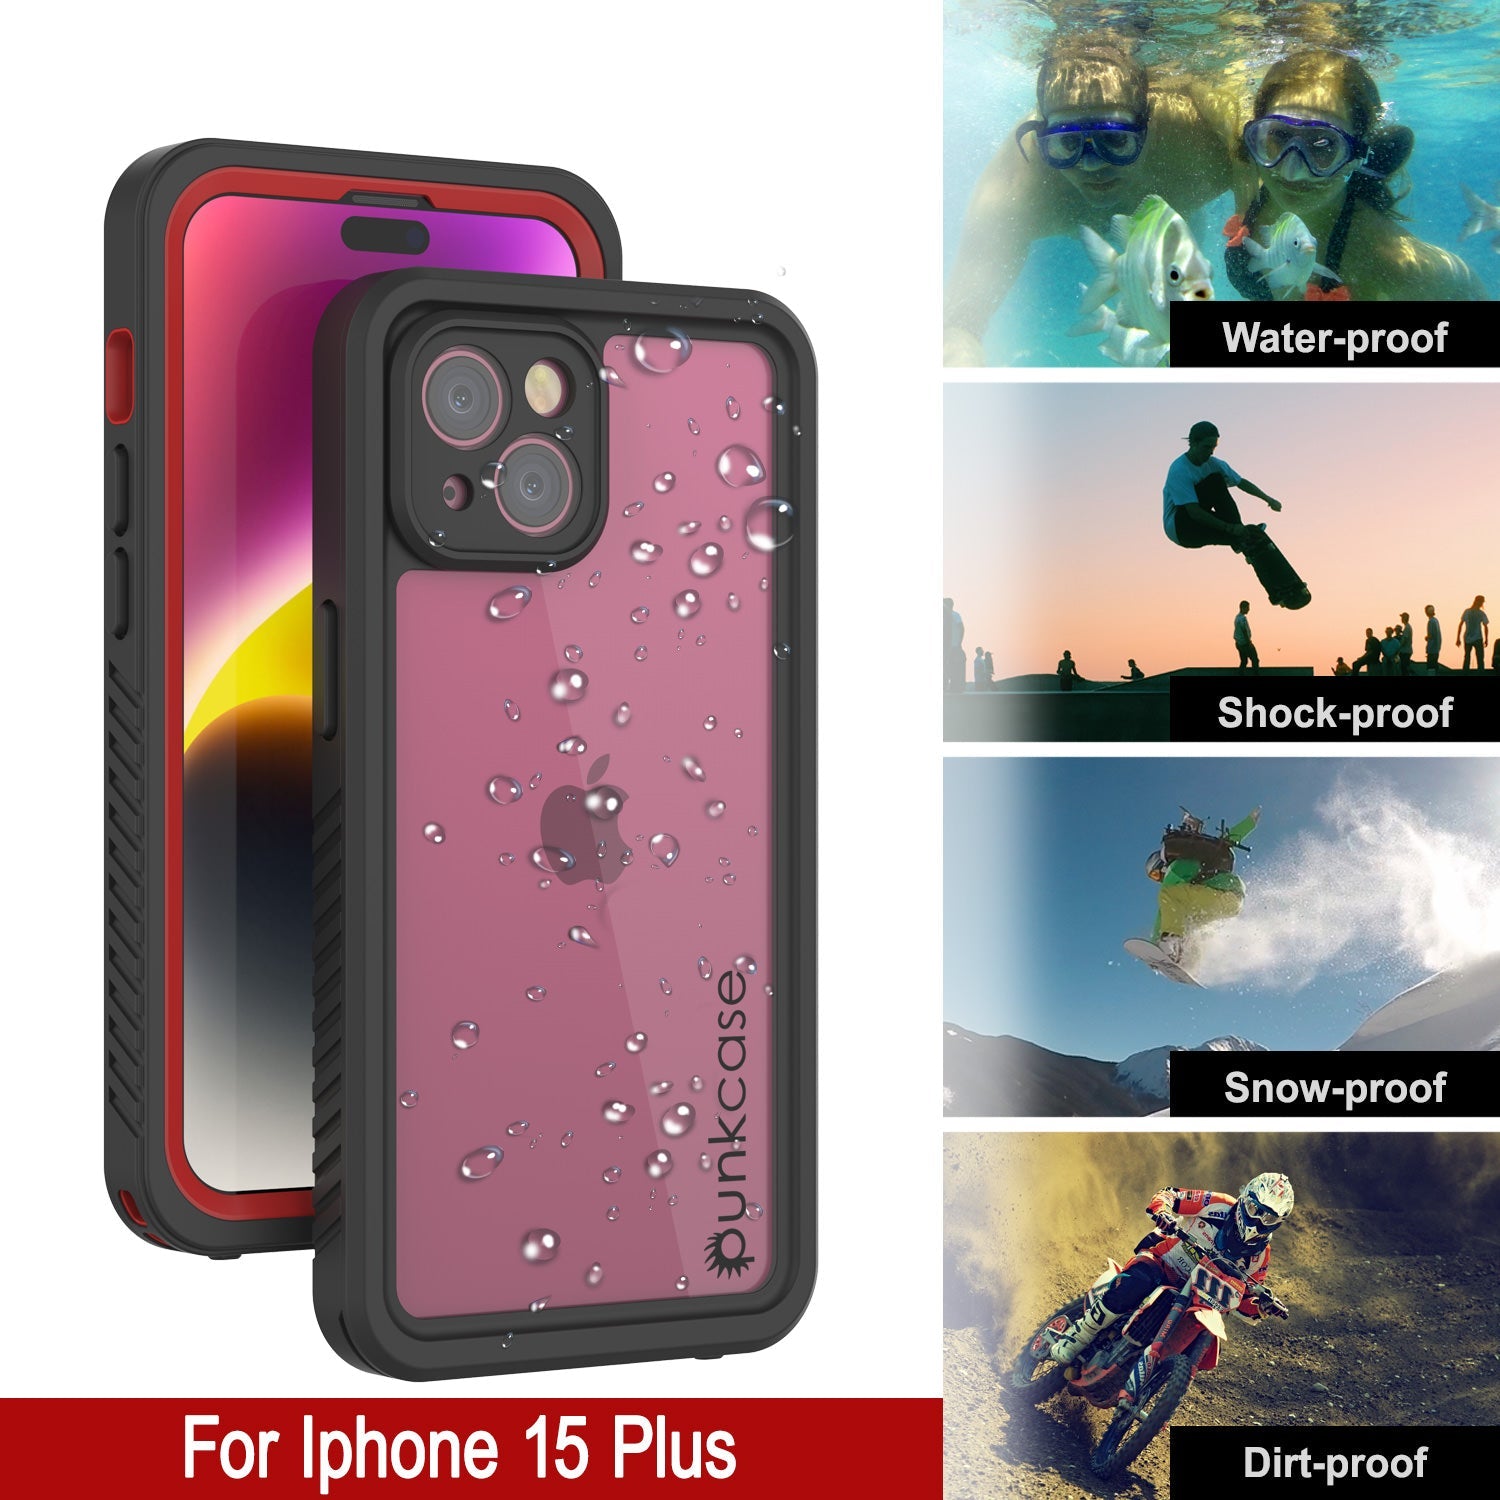 iPhone 15 Plus Waterproof Case, Punkcase [Extreme Series] Armor Cover W/ Built In Screen Protector [Red]